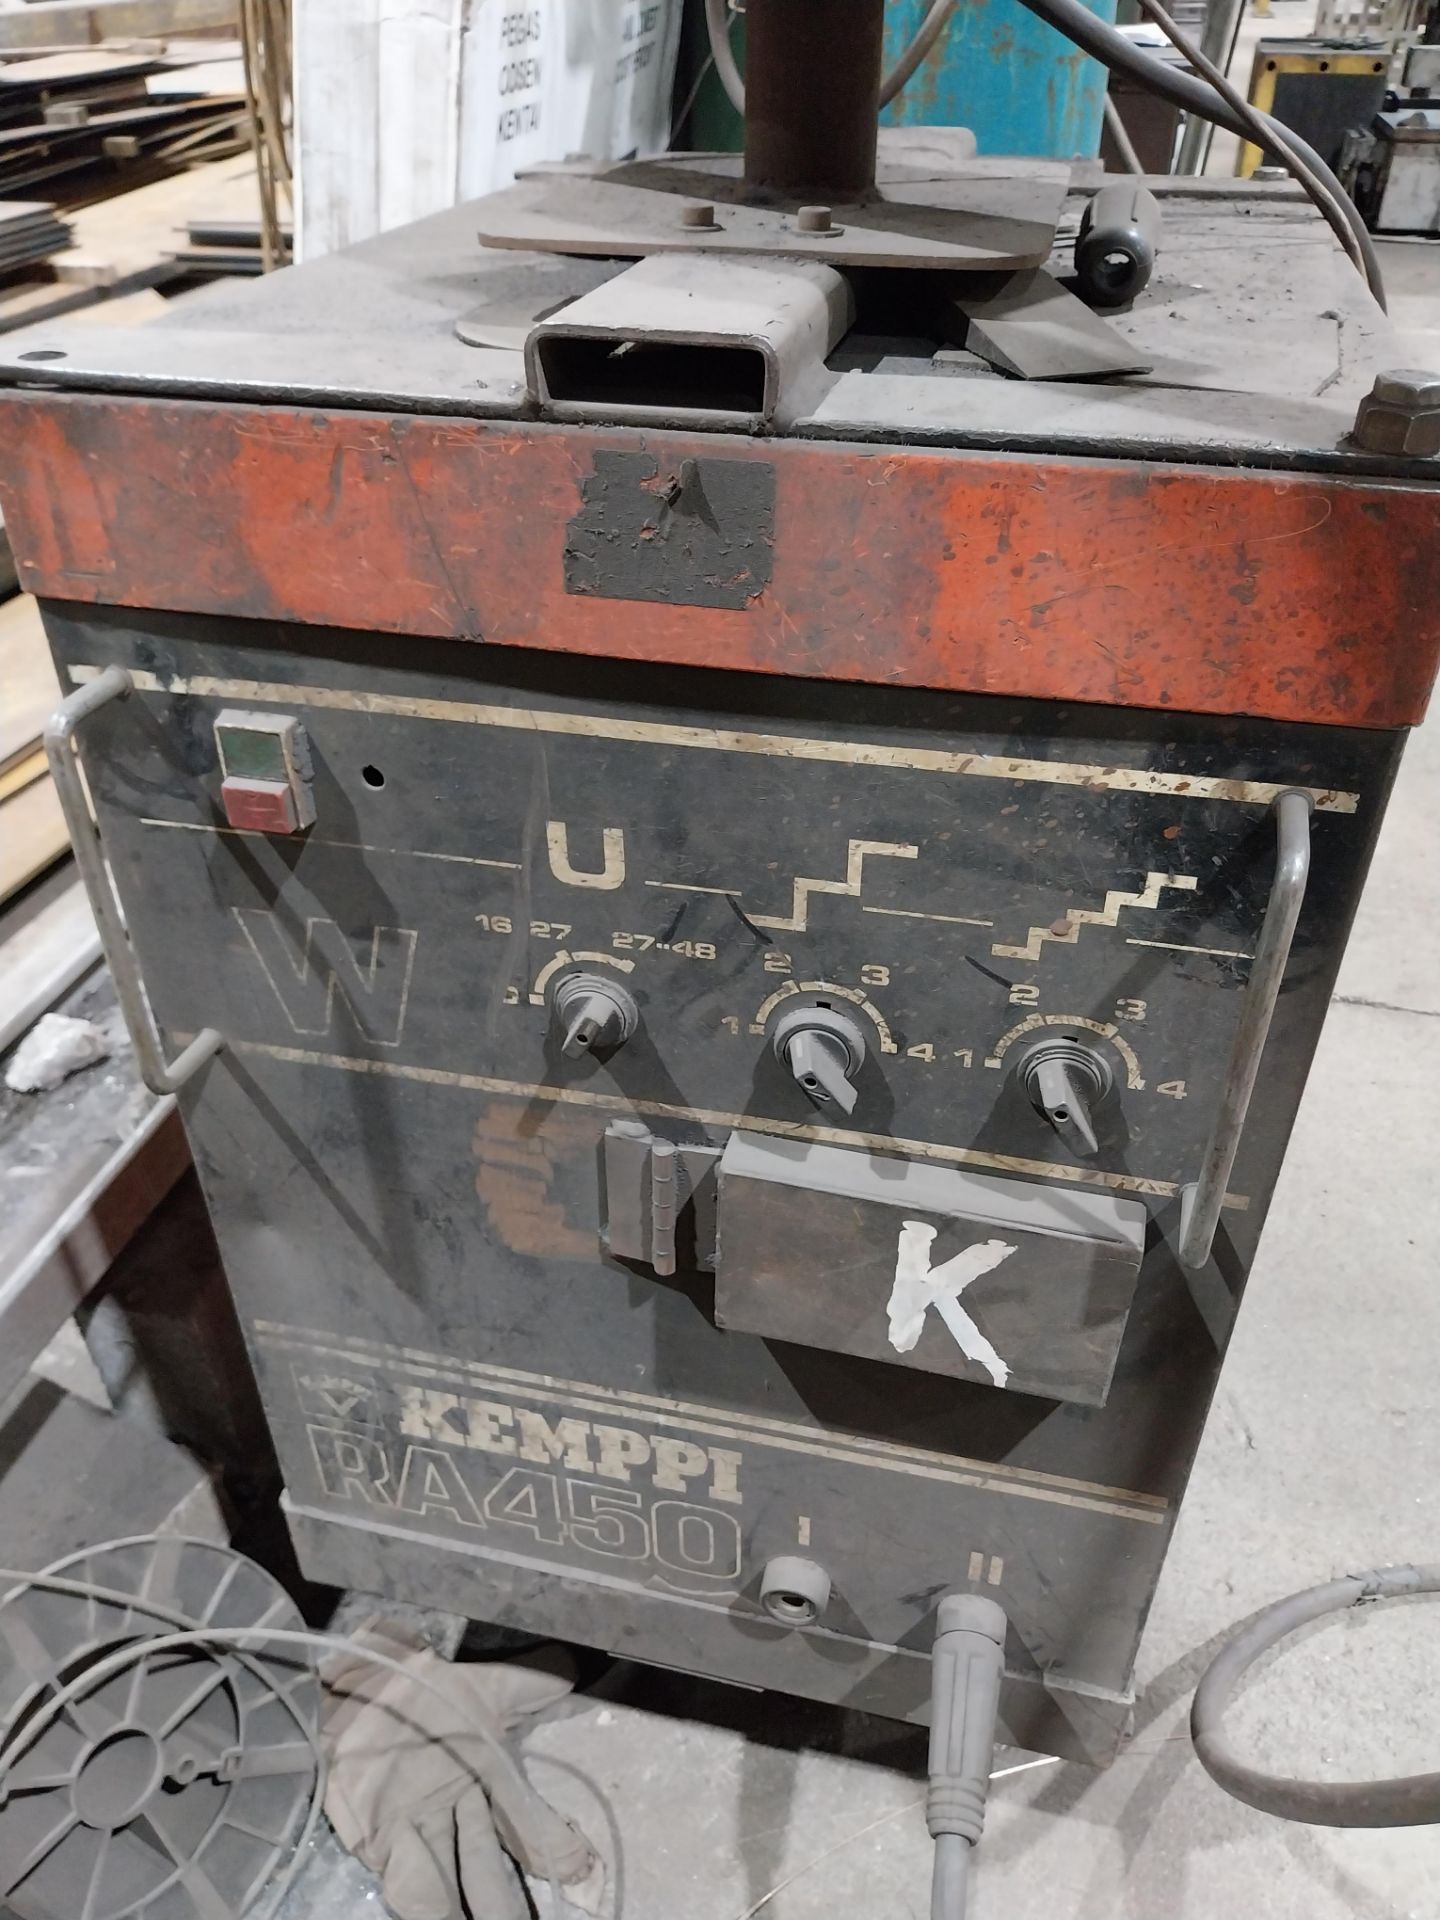 Kempp RA450 mig welder with F40 wire feed, torch and clamp (bottle not included) - Image 3 of 7